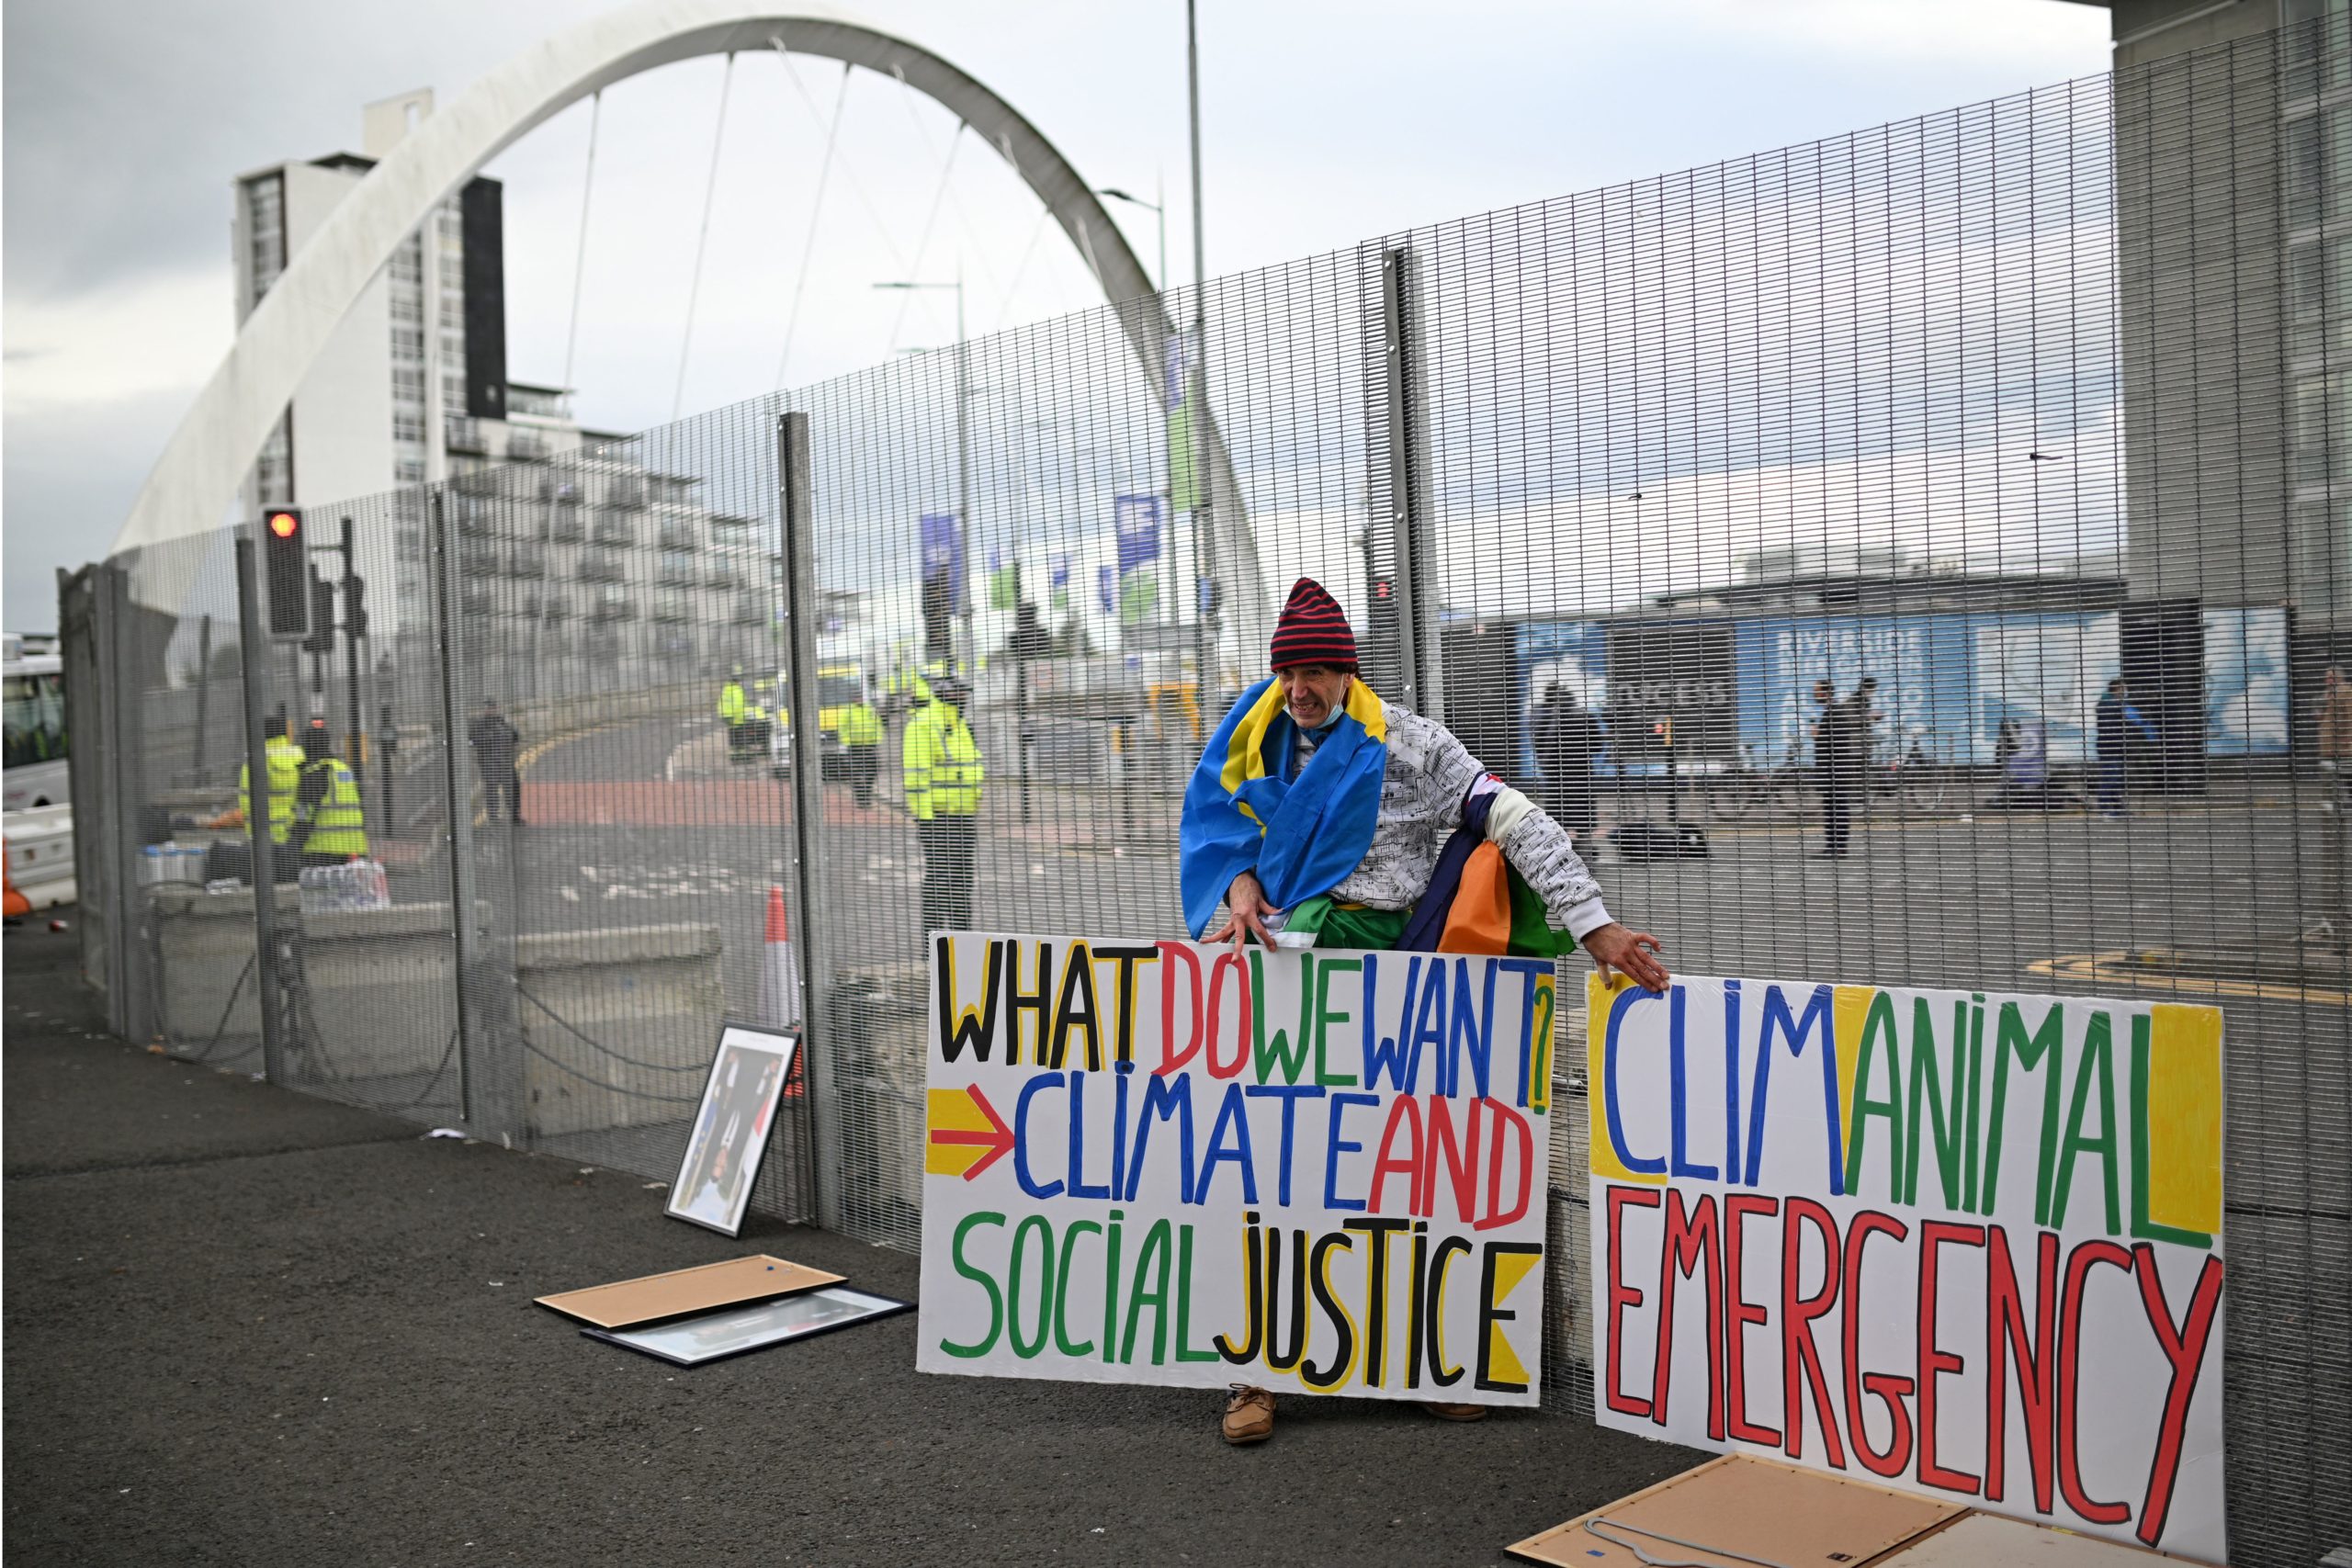 A French activist demonstrates outside COP26 in Glasgow, U.K. on Monday. (Oli Scarff/AFP via Getty Images)